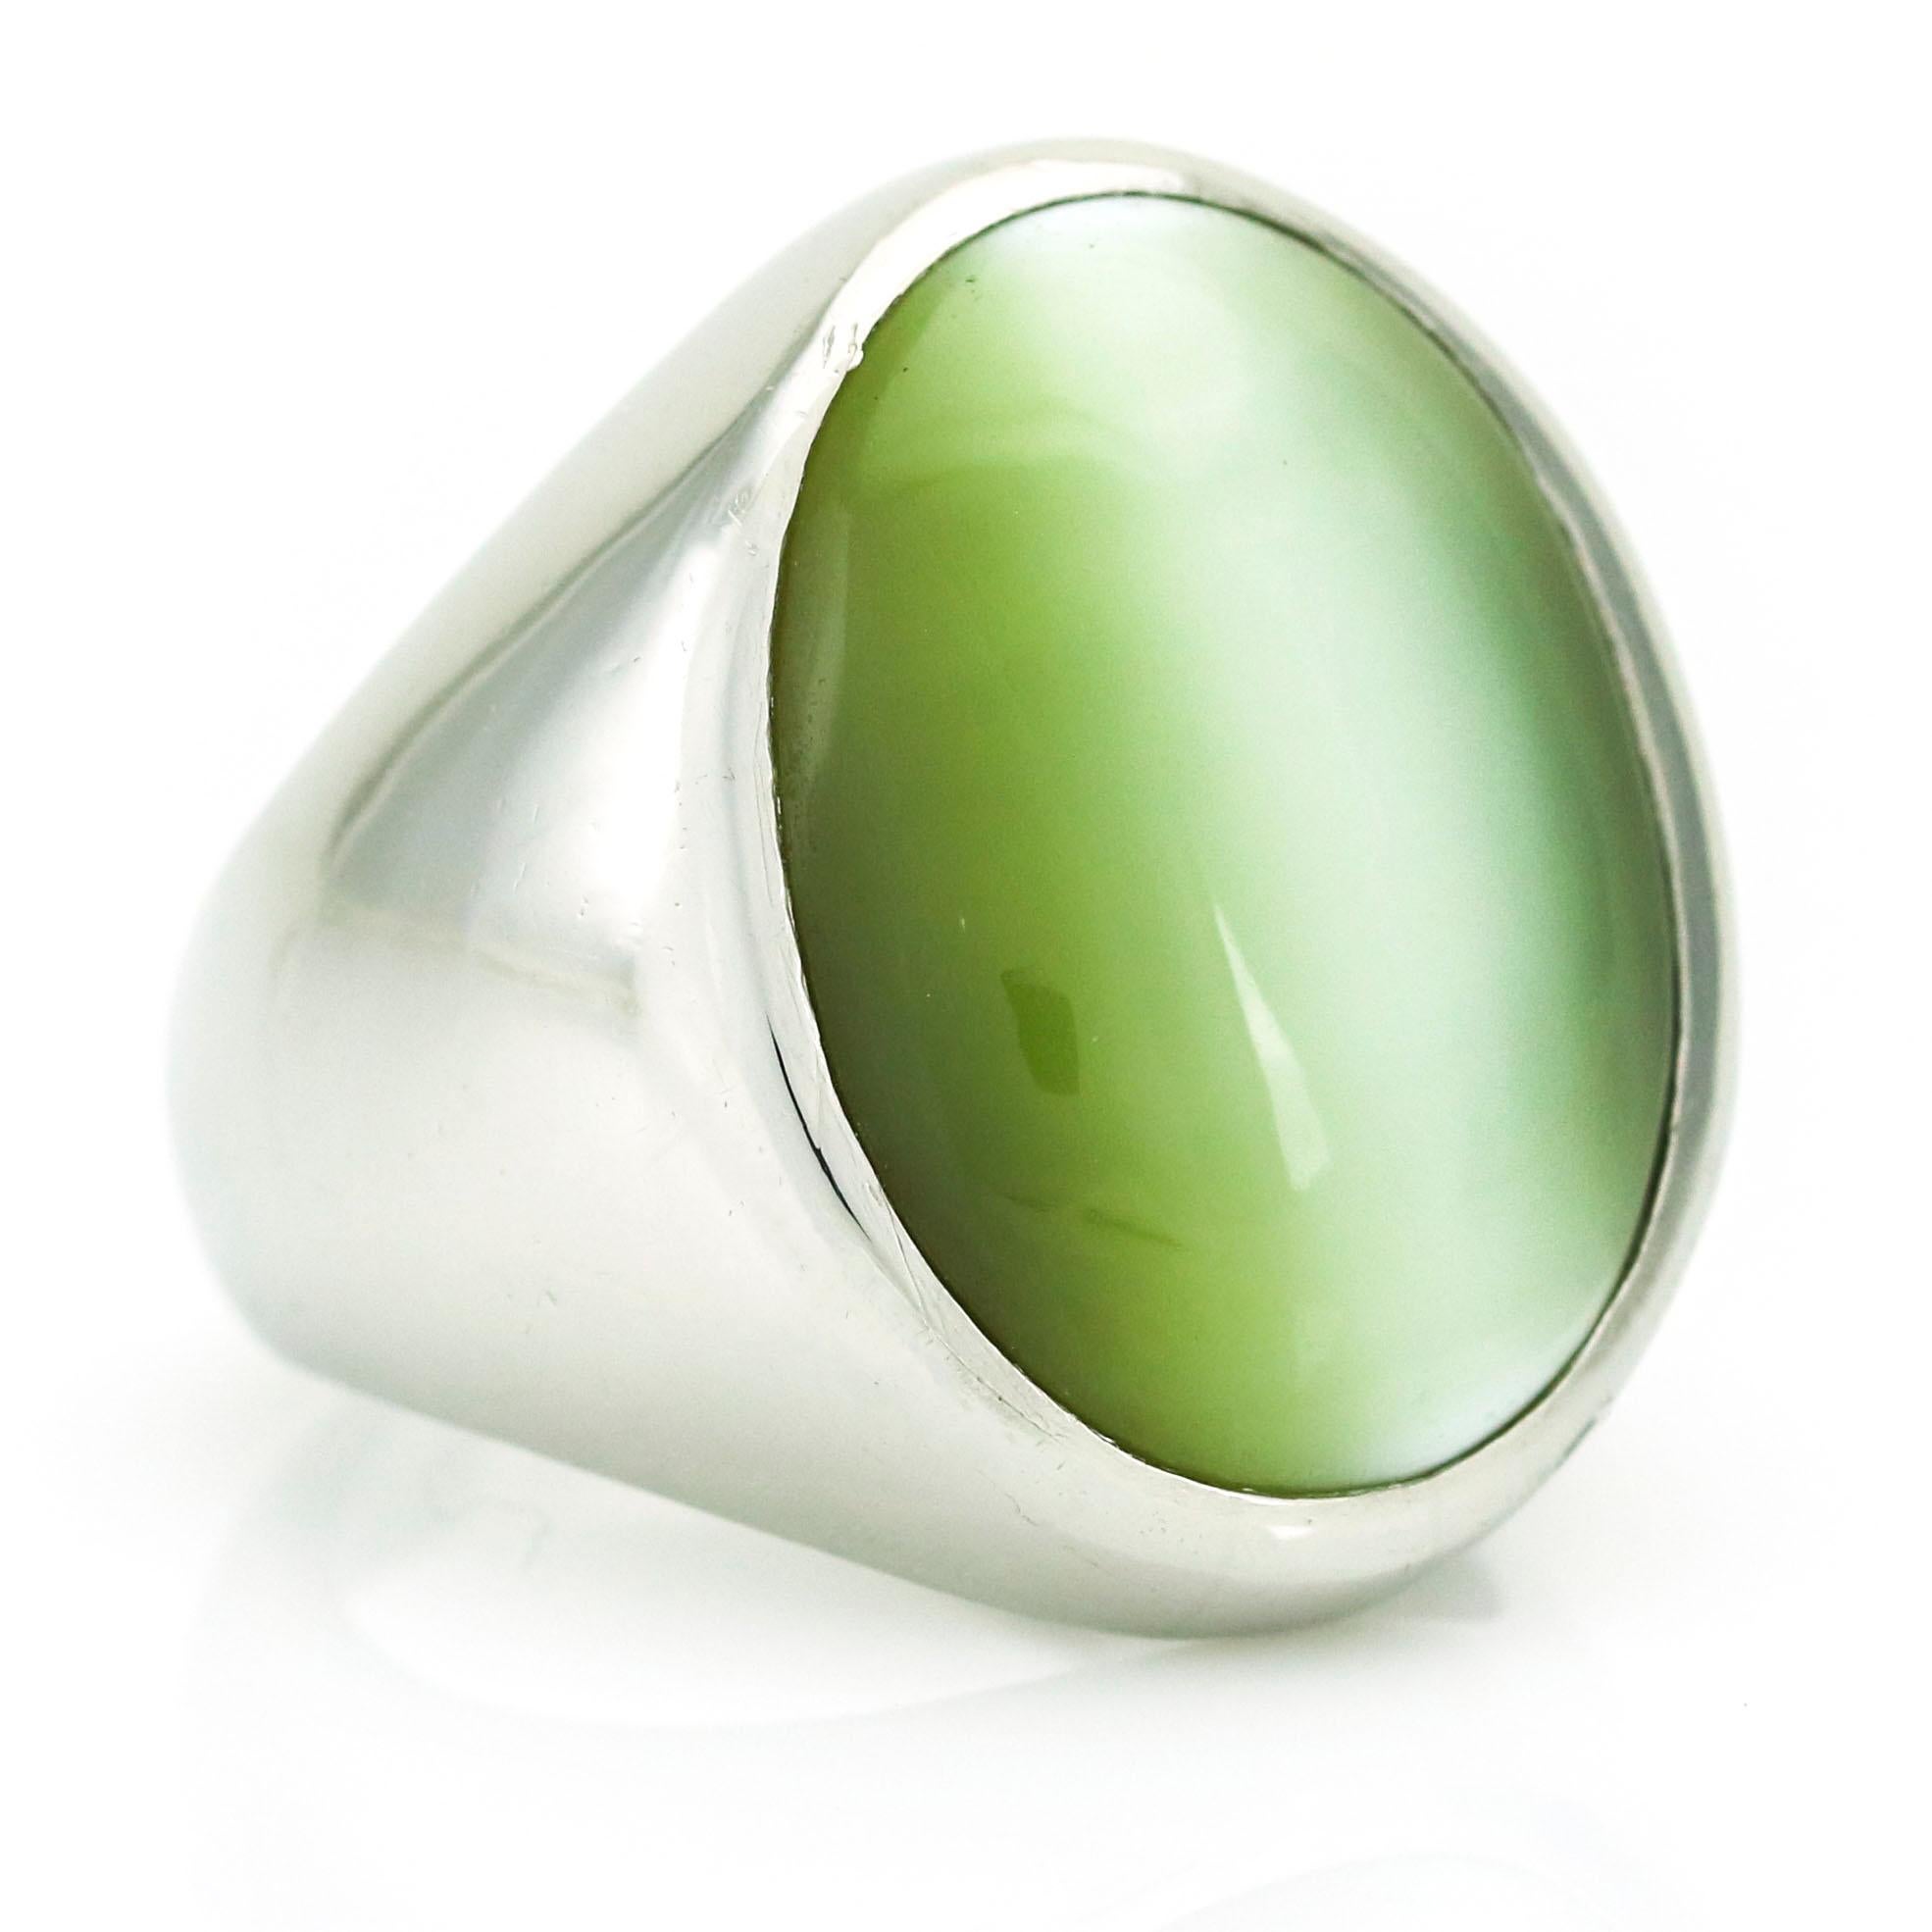 Gemstone signet ring in platinum with GIA Origin Report. The ring is bezel set with an oval double cabochon yellow-green natural cat's eye Chrysoberyl stone. Polished metal finish. Unisex.

Size, 7.5
Estimated Gemstone Total Carat Weight, 25.00